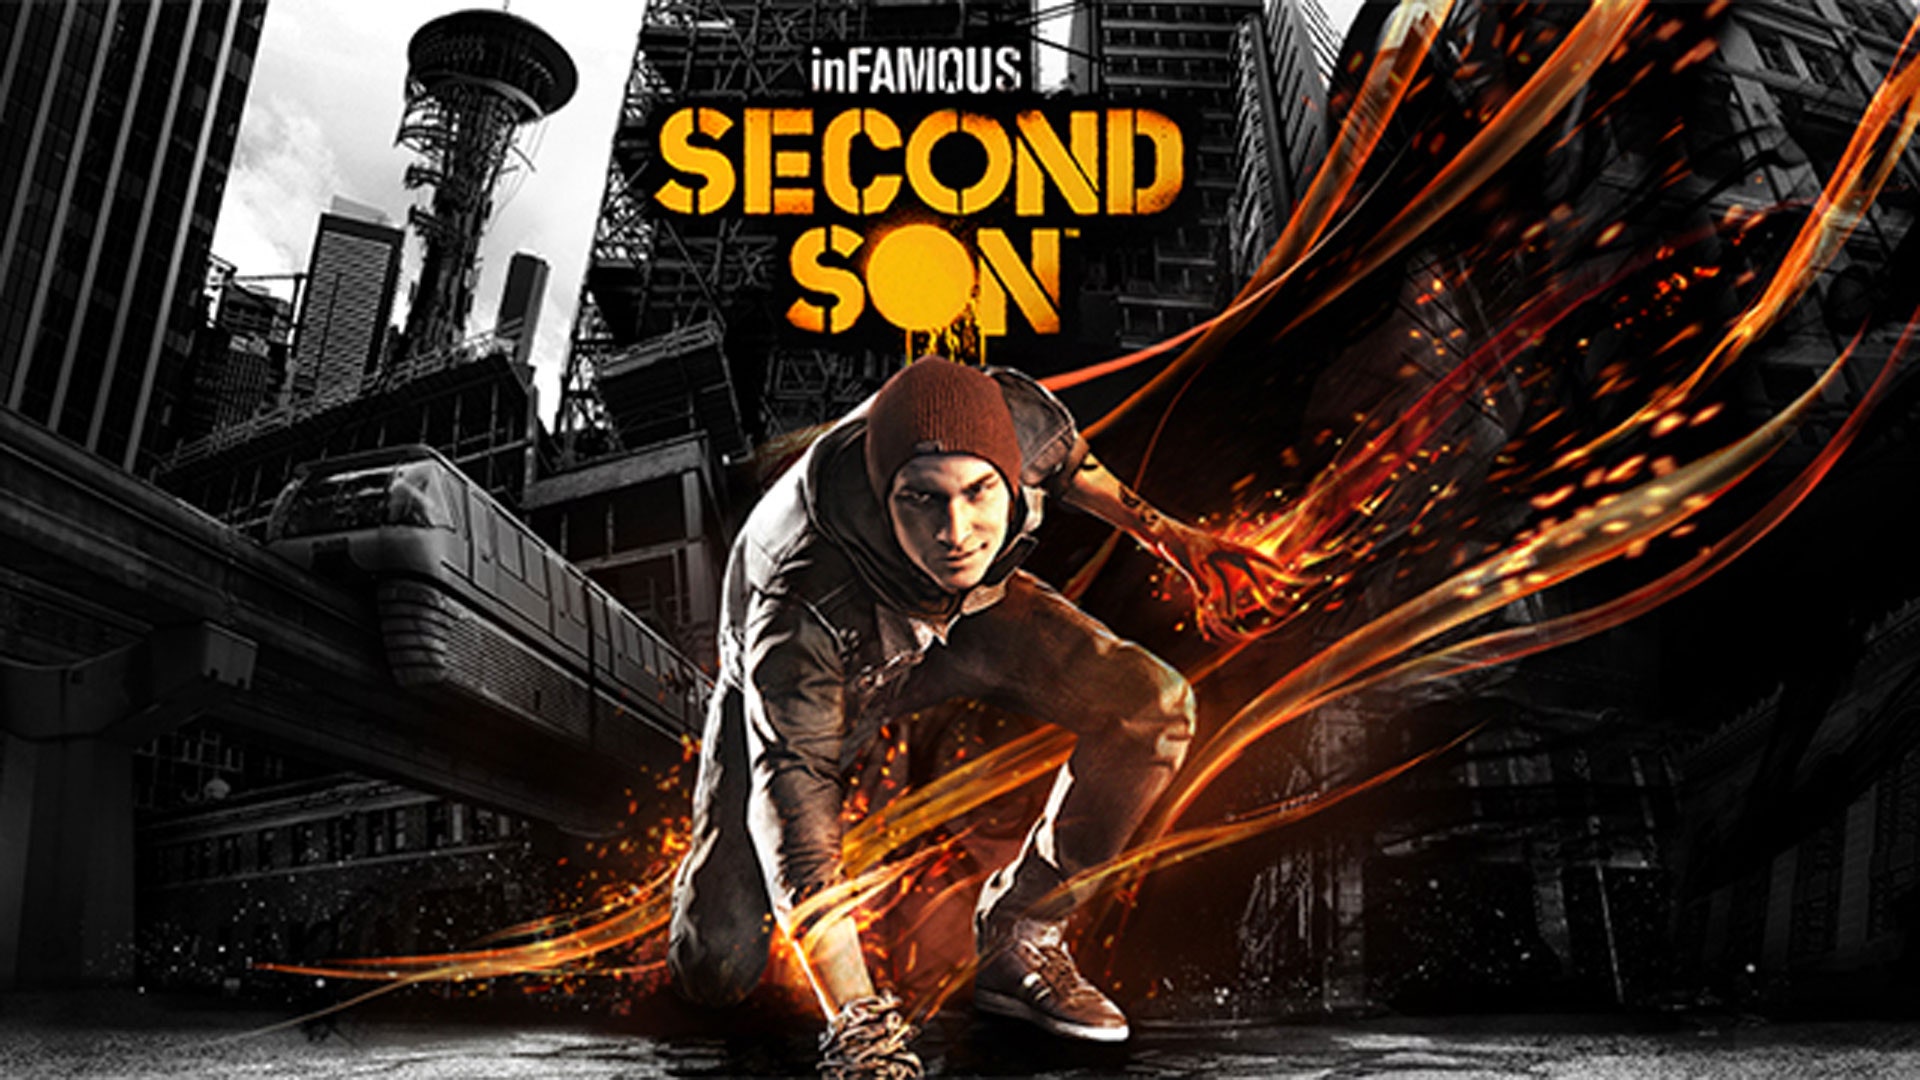 Infamous second son game review gq india